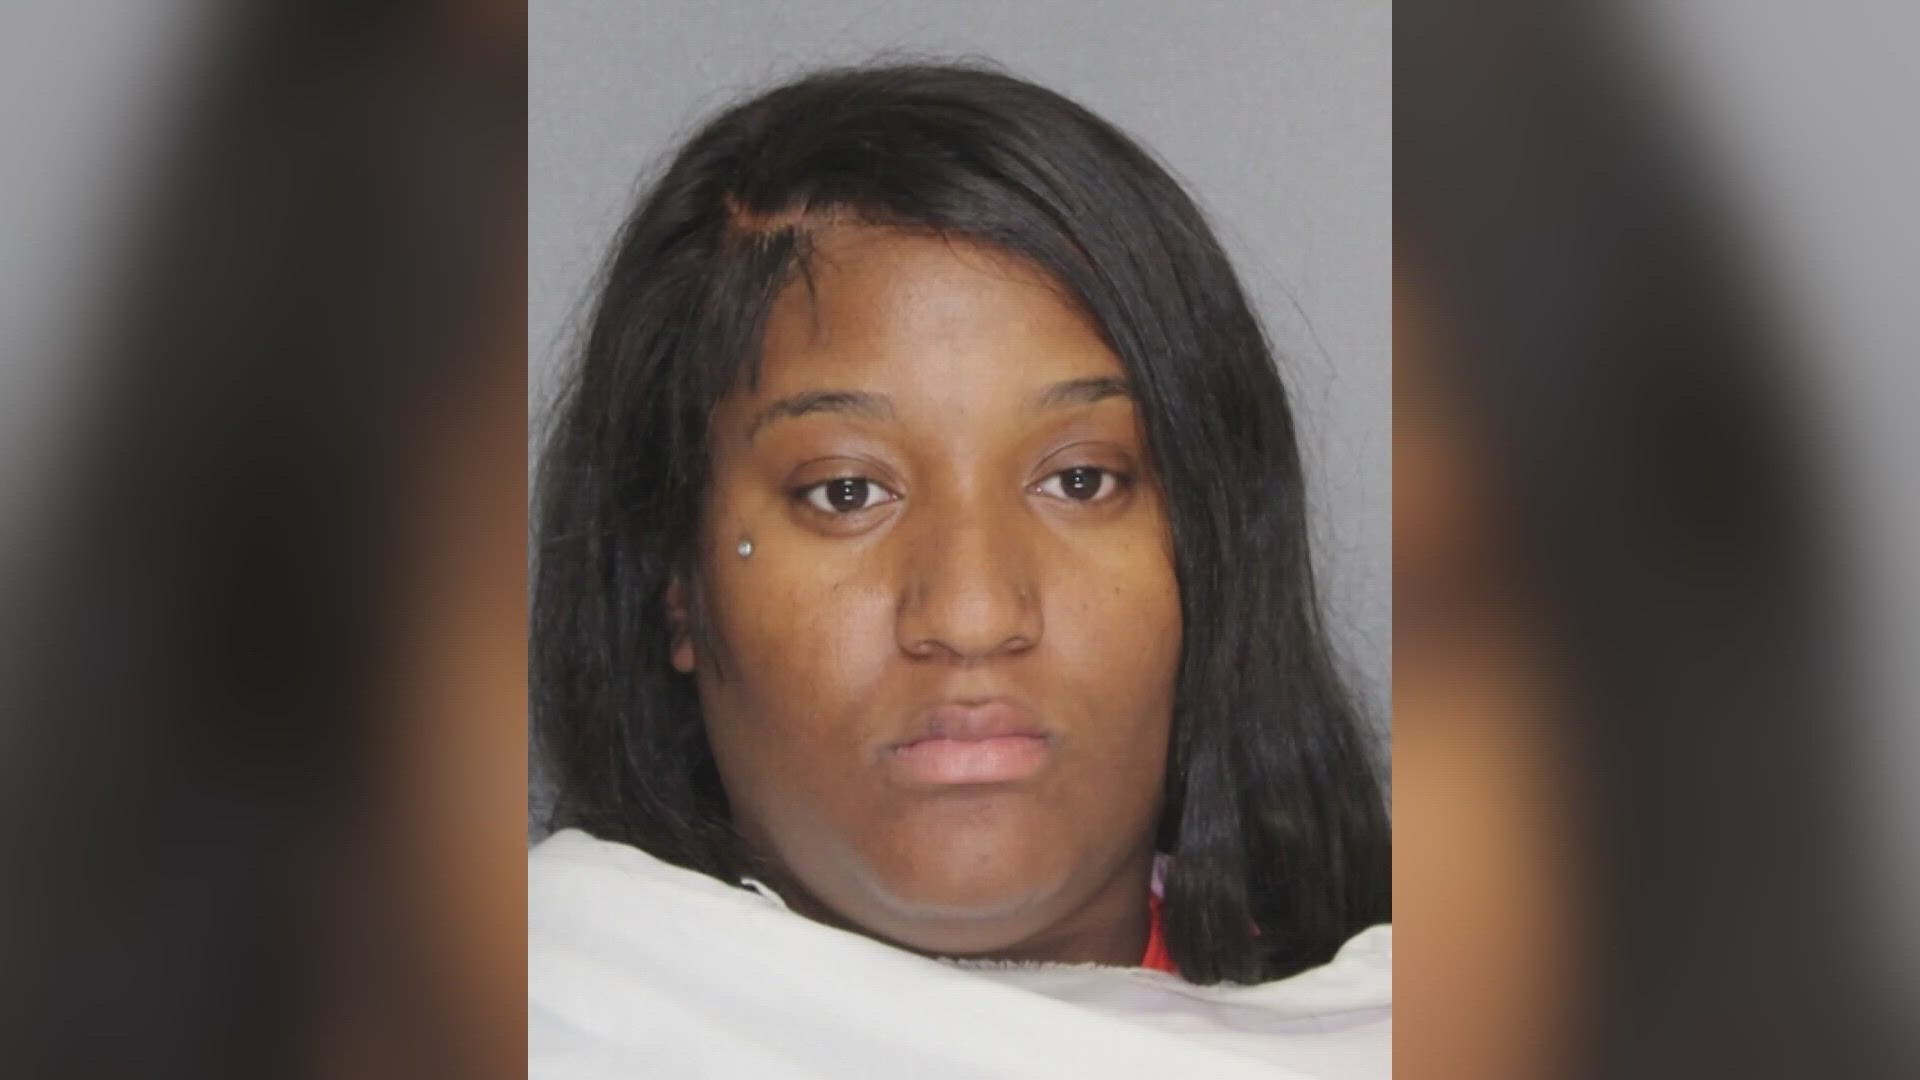 Shamaiya Hall was first arrested in early March after reportedly stabbing three of her children to death and attempting to kill two others.